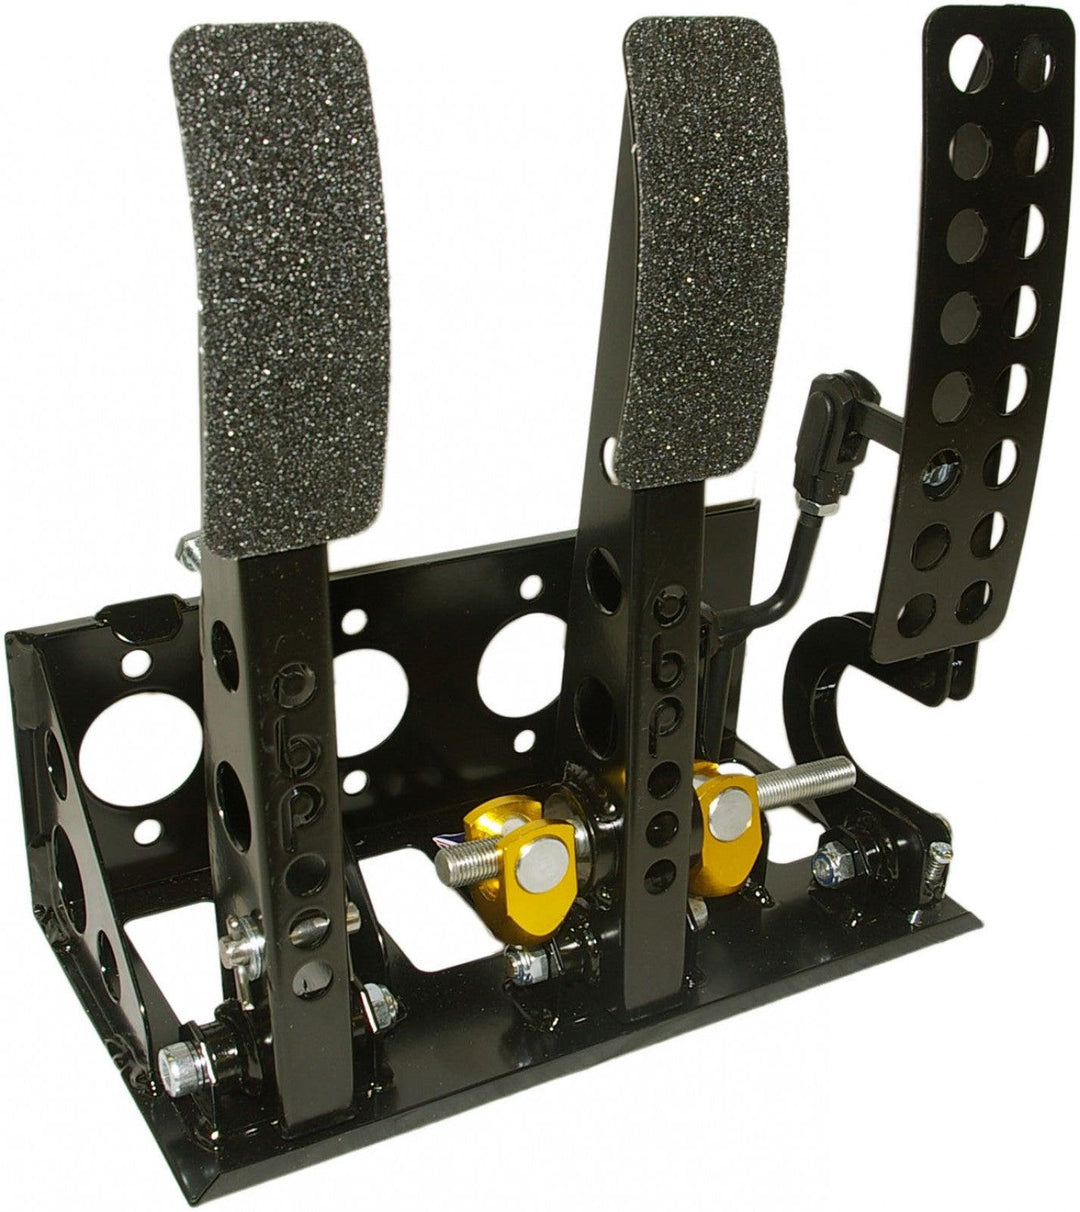 obp Motorsport Victory Floor Mounted Bulkhead Fit 3 Pedal System - Attacking the Clock Racing